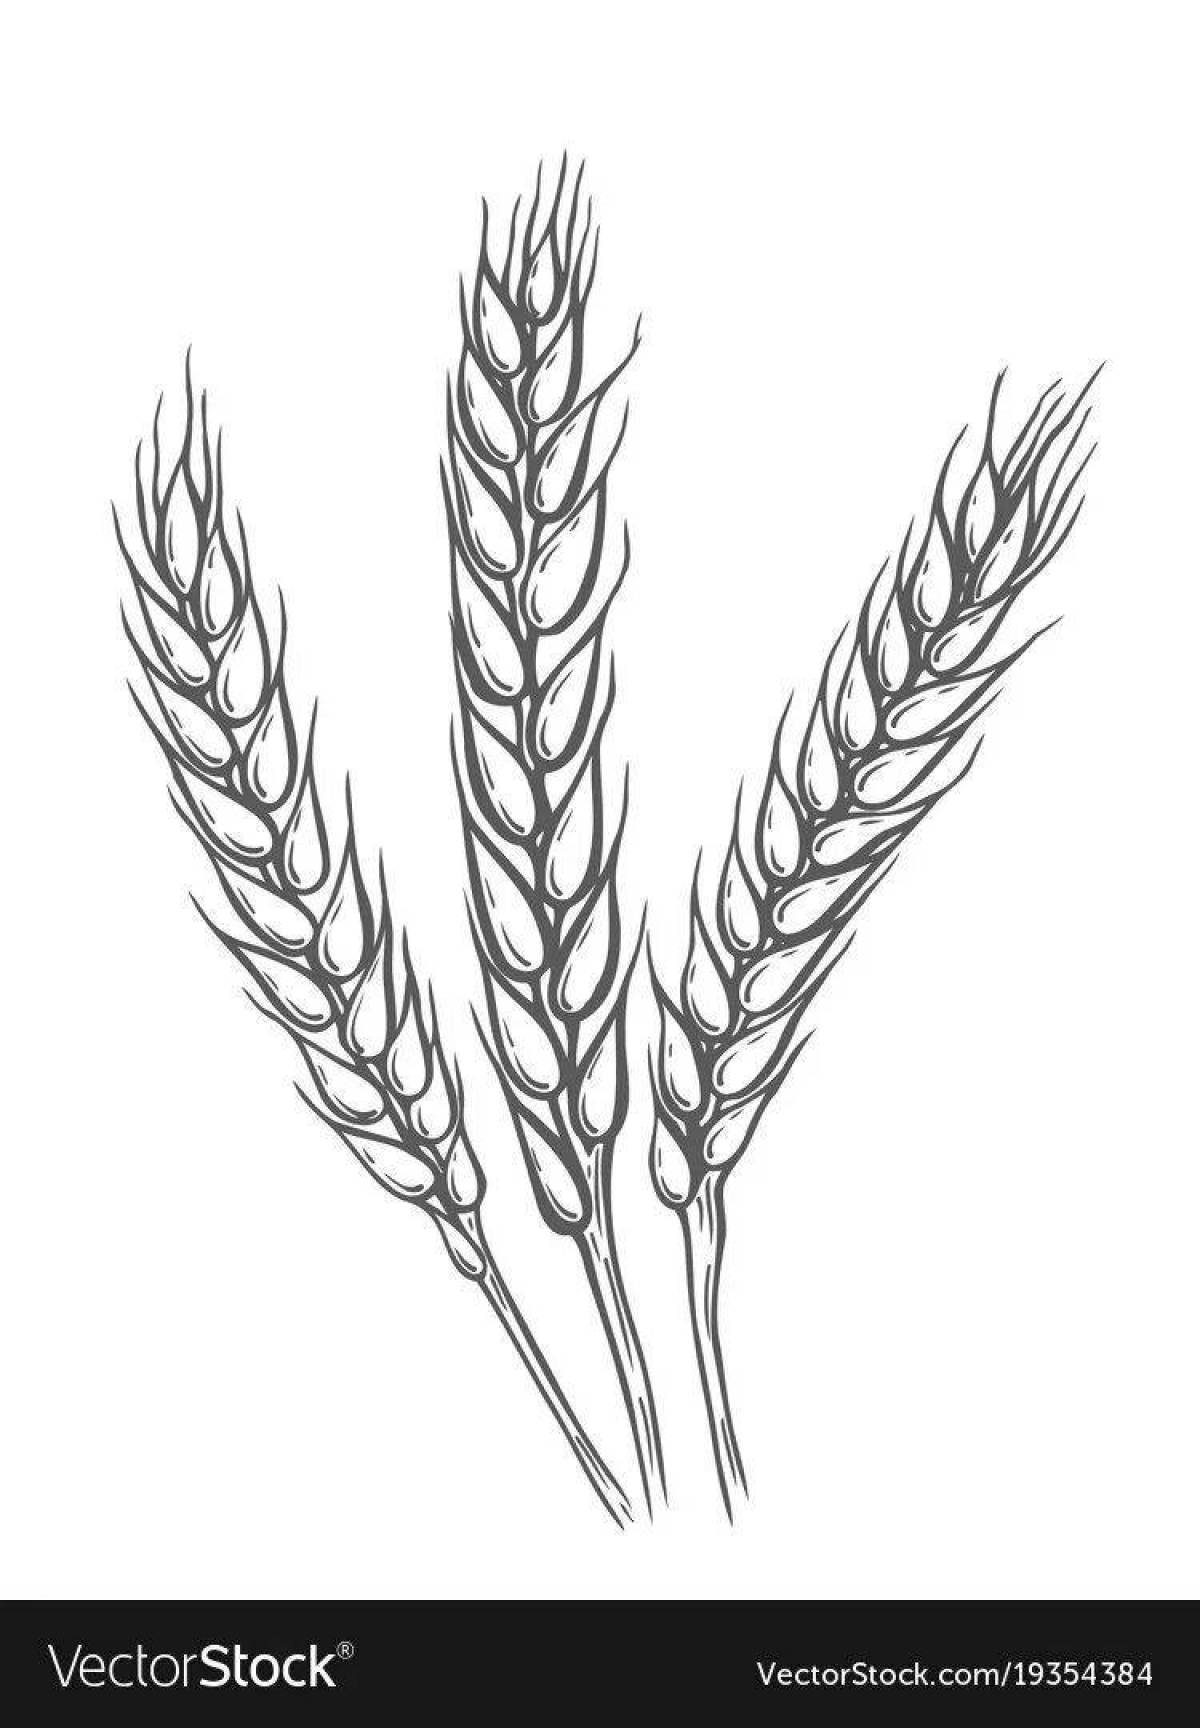 Coloring lush ears of wheat